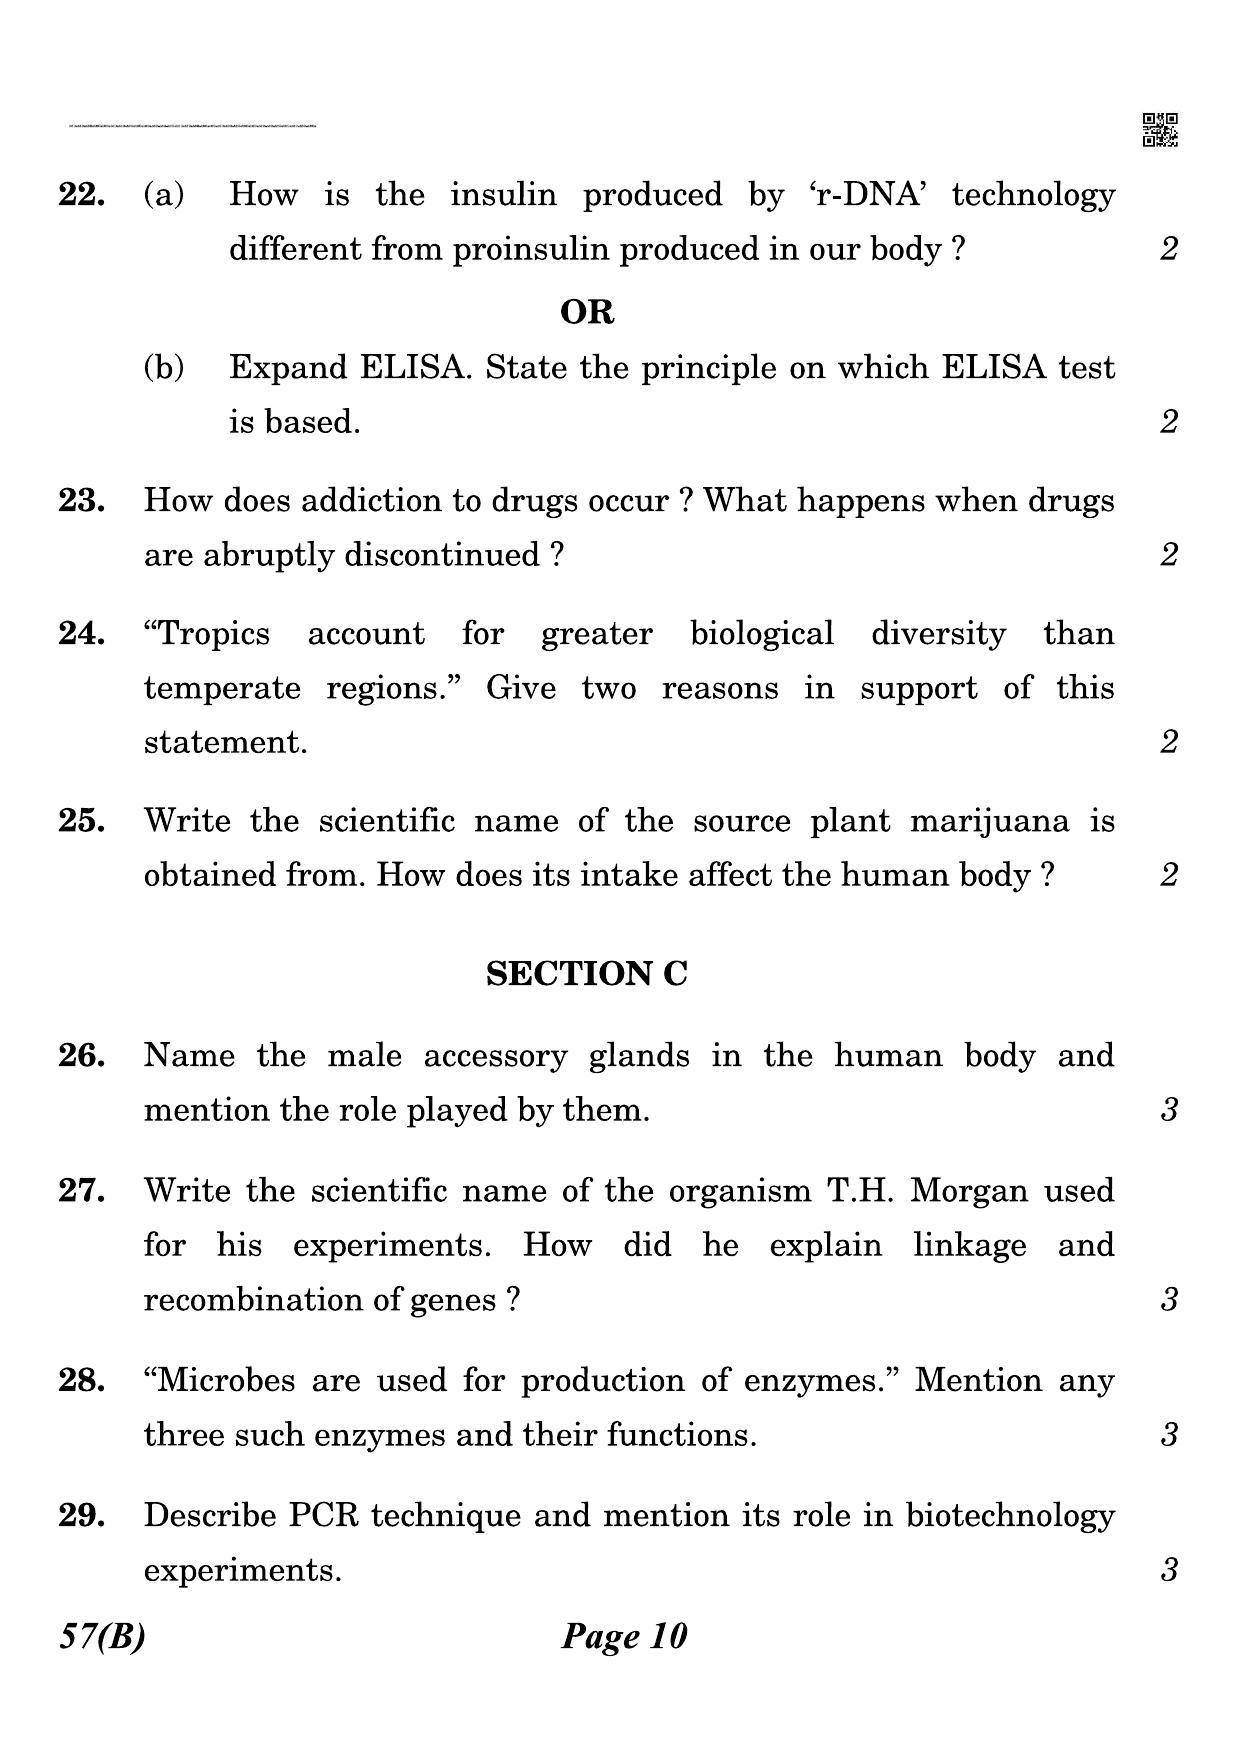 CBSE Class 12 QP_044_biology_for_visually_impared_candidates 2021 Compartment Question Paper - Page 10